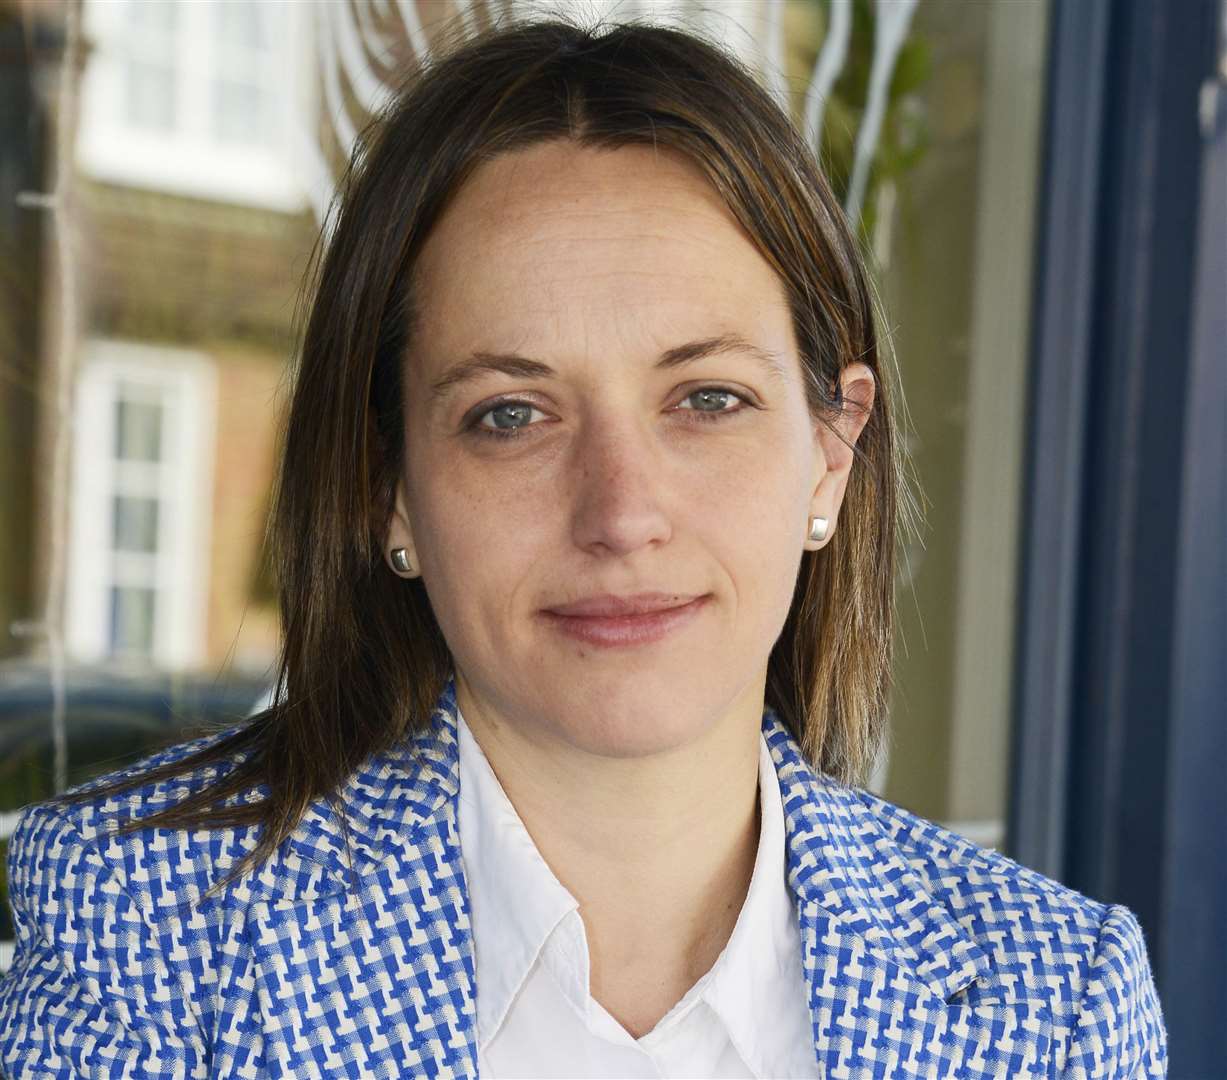 Mp Helen Whately who has arranged meetings to get improvements to nearby roads